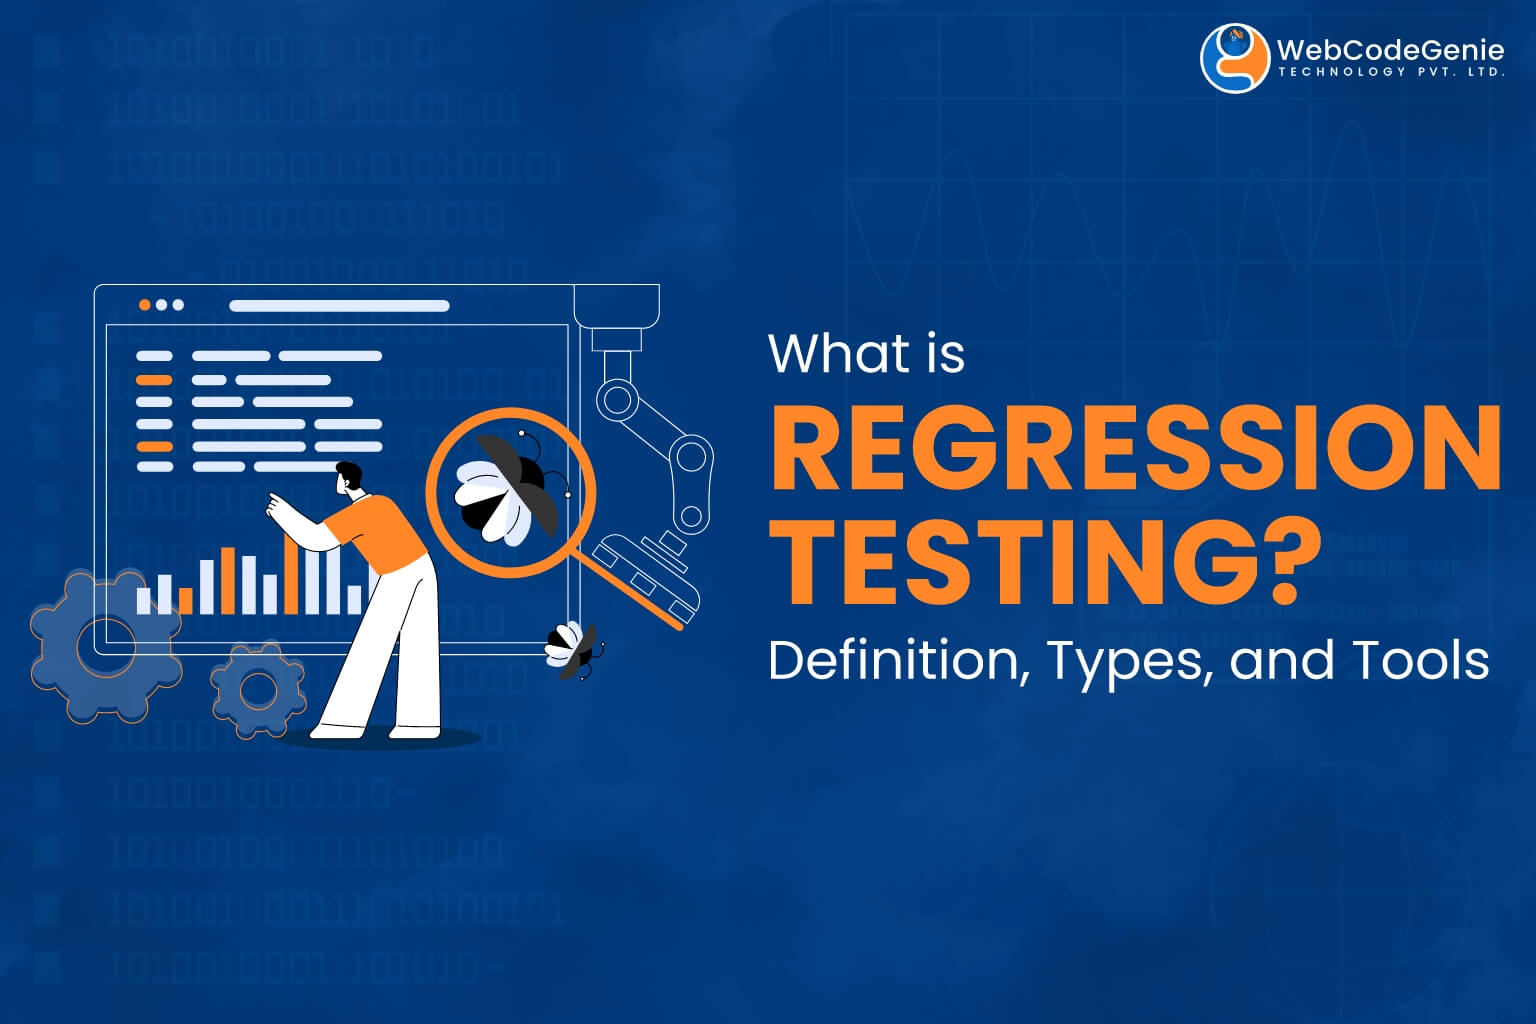 What is Regression Testing Definition, Types, and Tools